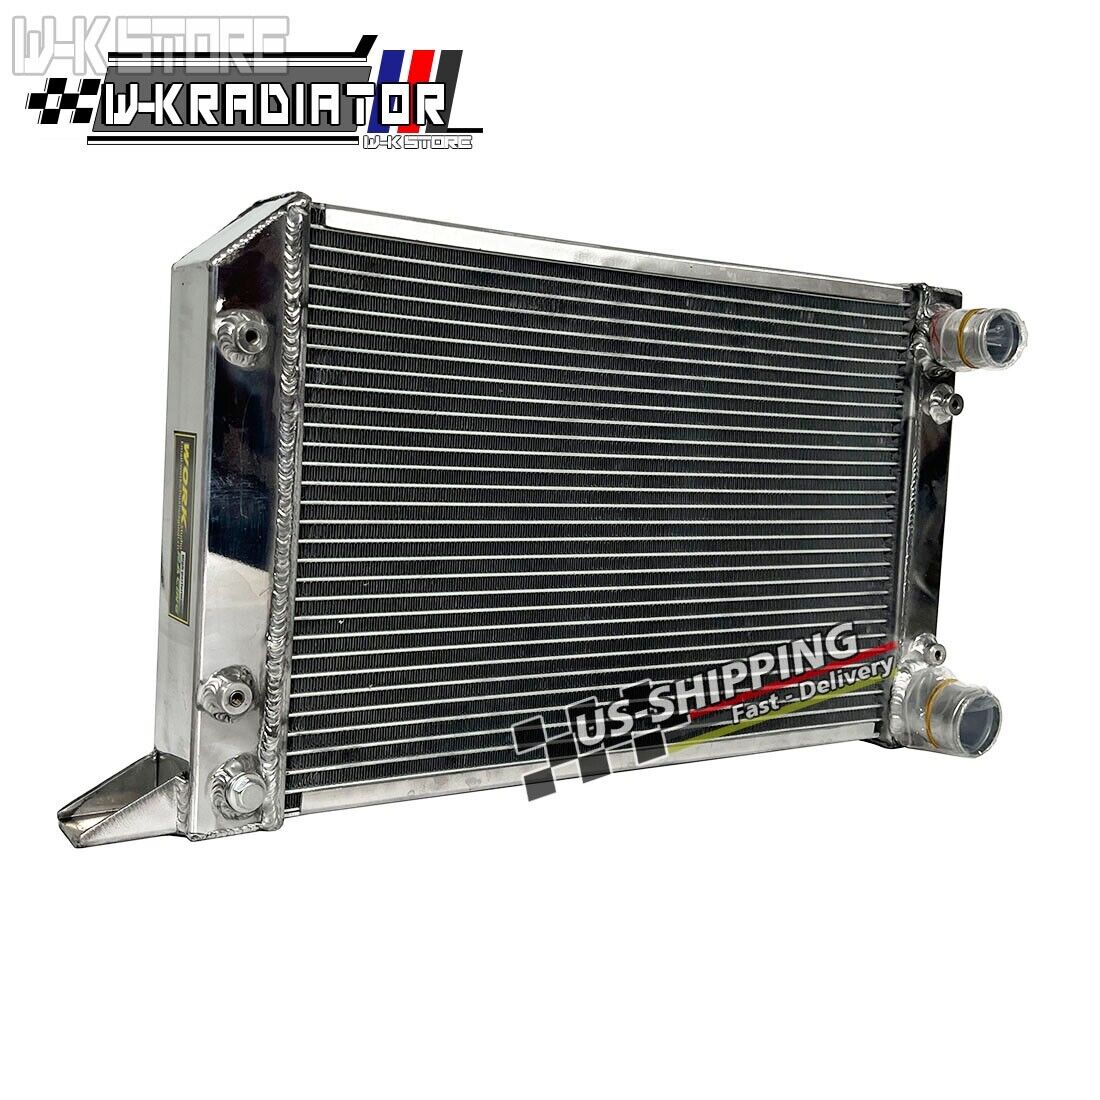 Aluminum Radiator For VW Scirocco Pro Stock Style Drag Racing Use Lightweight